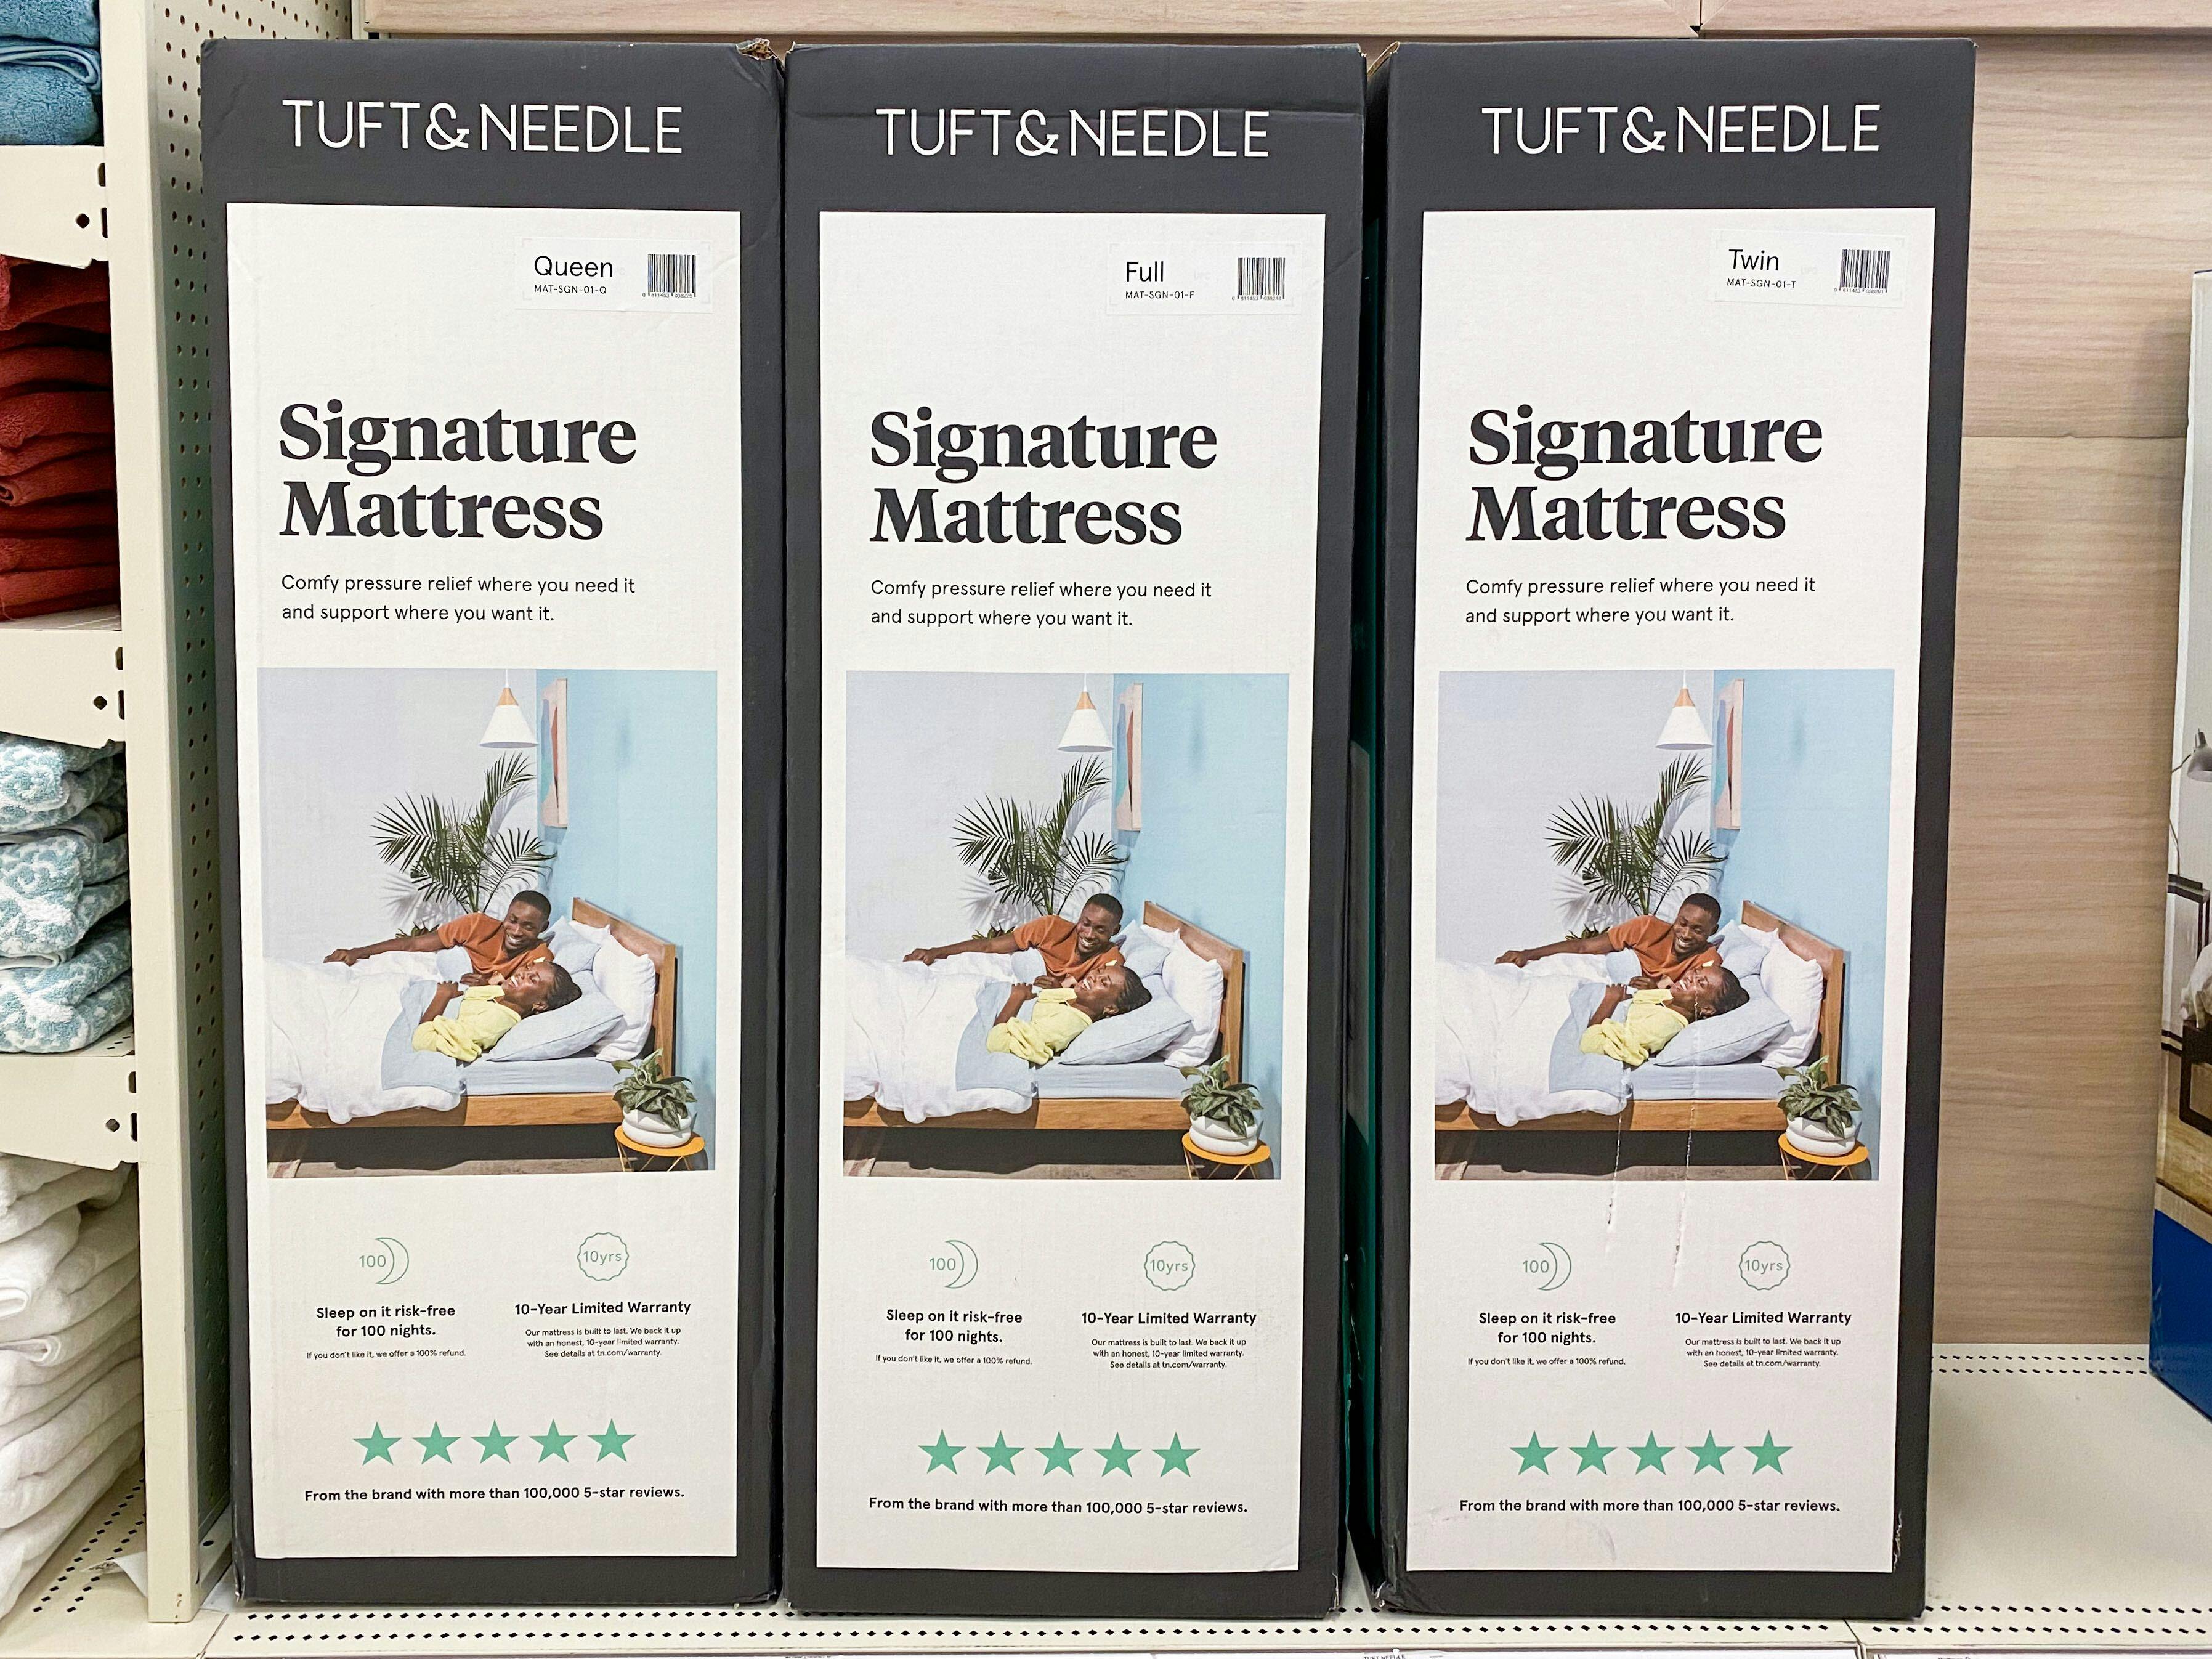 tuft and needle signature mattress boxes in store